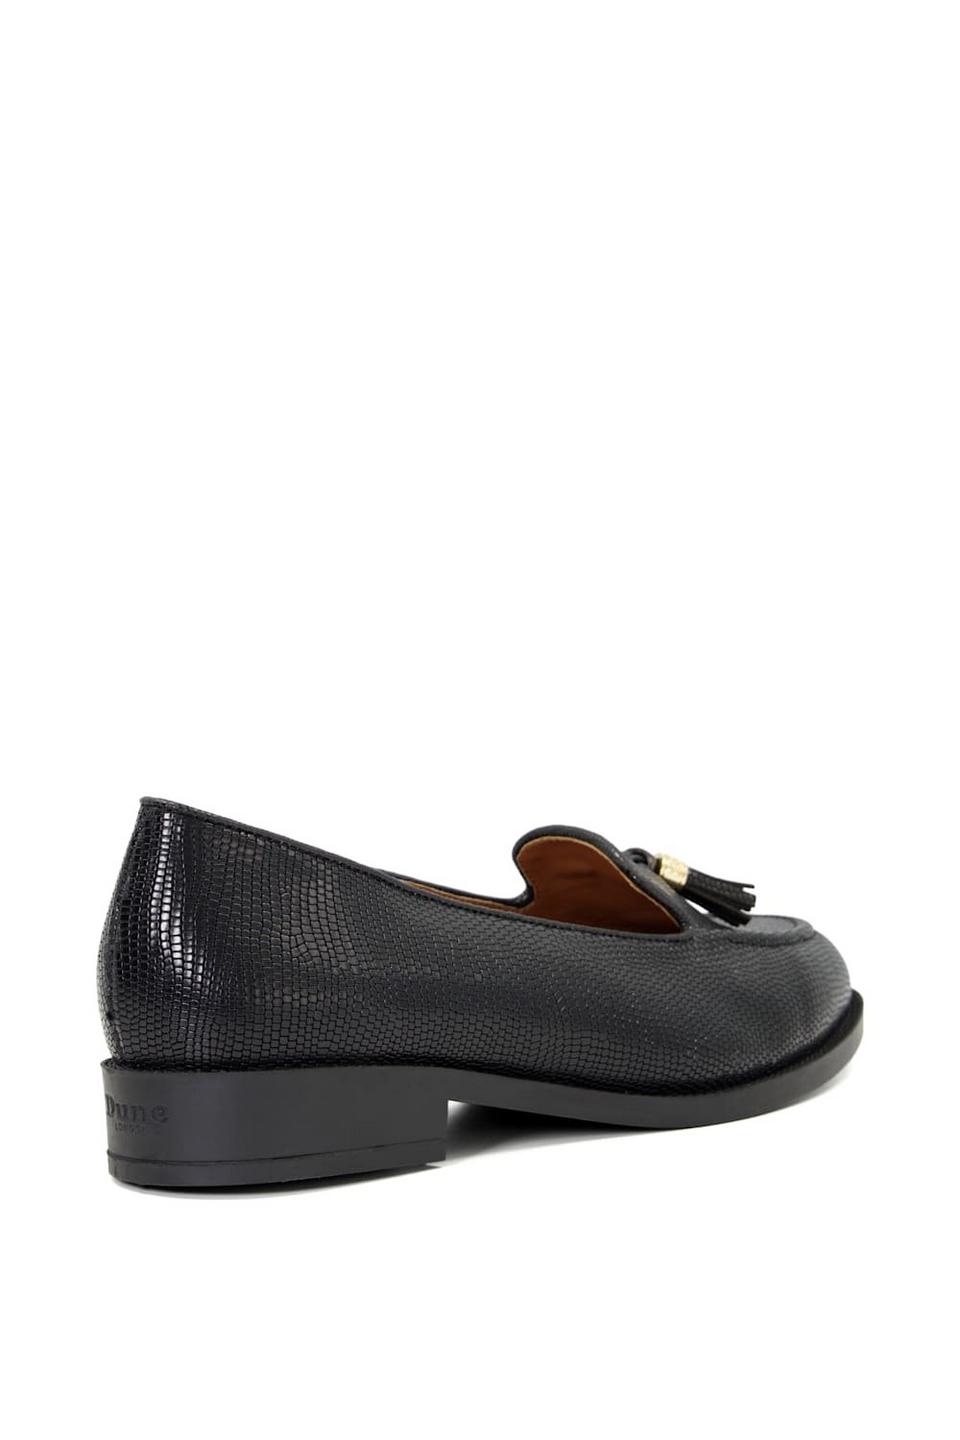 Flats | Wide Fit 'Global' Leather Loafers | Dune London